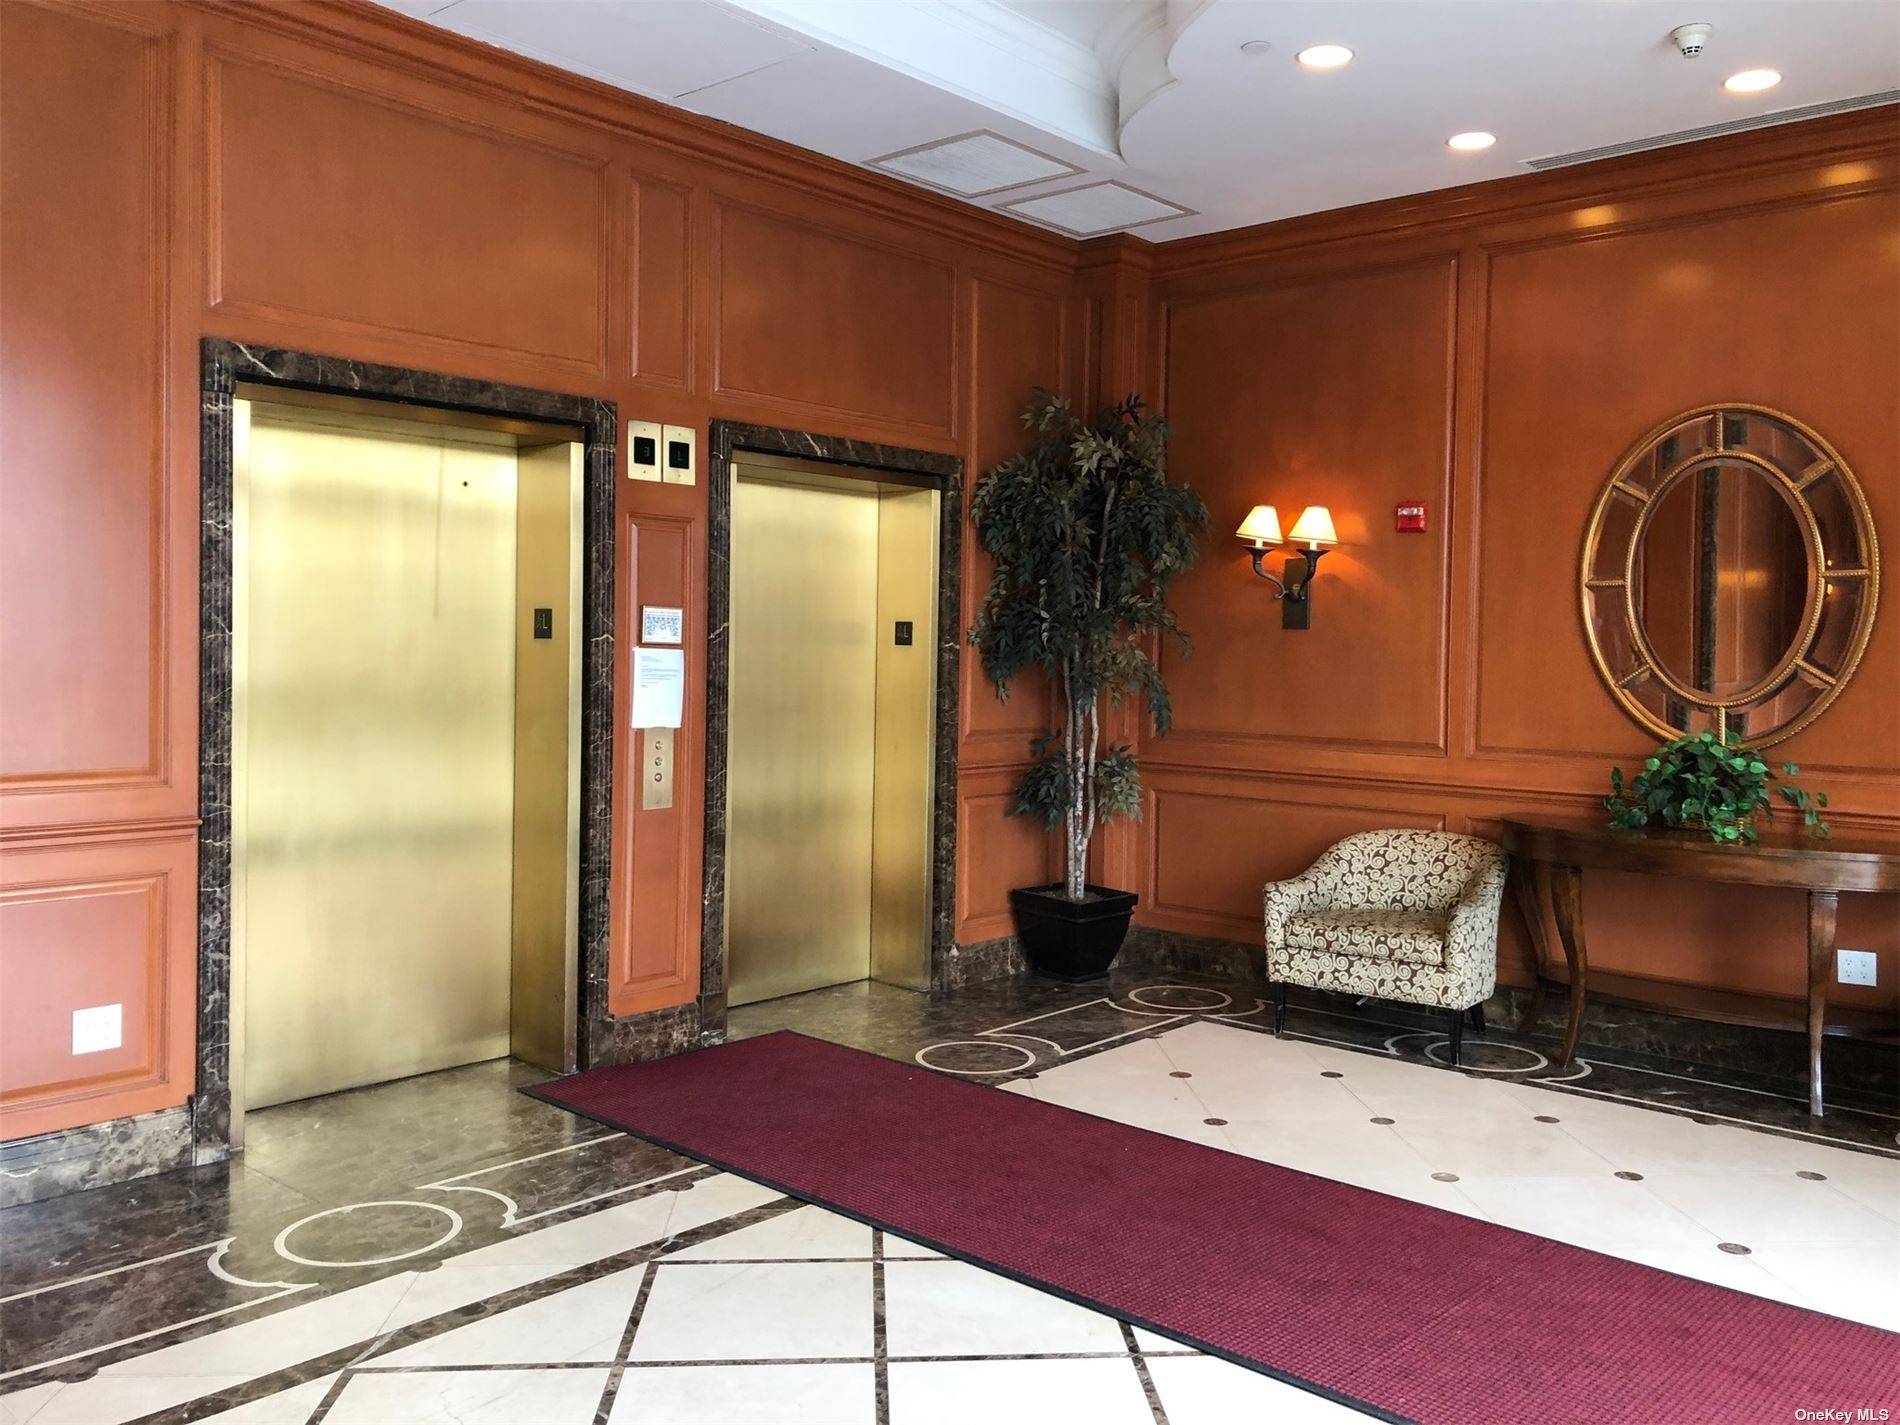 Luxury Doorman Building with Parking and Fitness Center included in rent, close proximity to shopping, entertainment and much more, located on the LIRR Express train line to Manhattan.